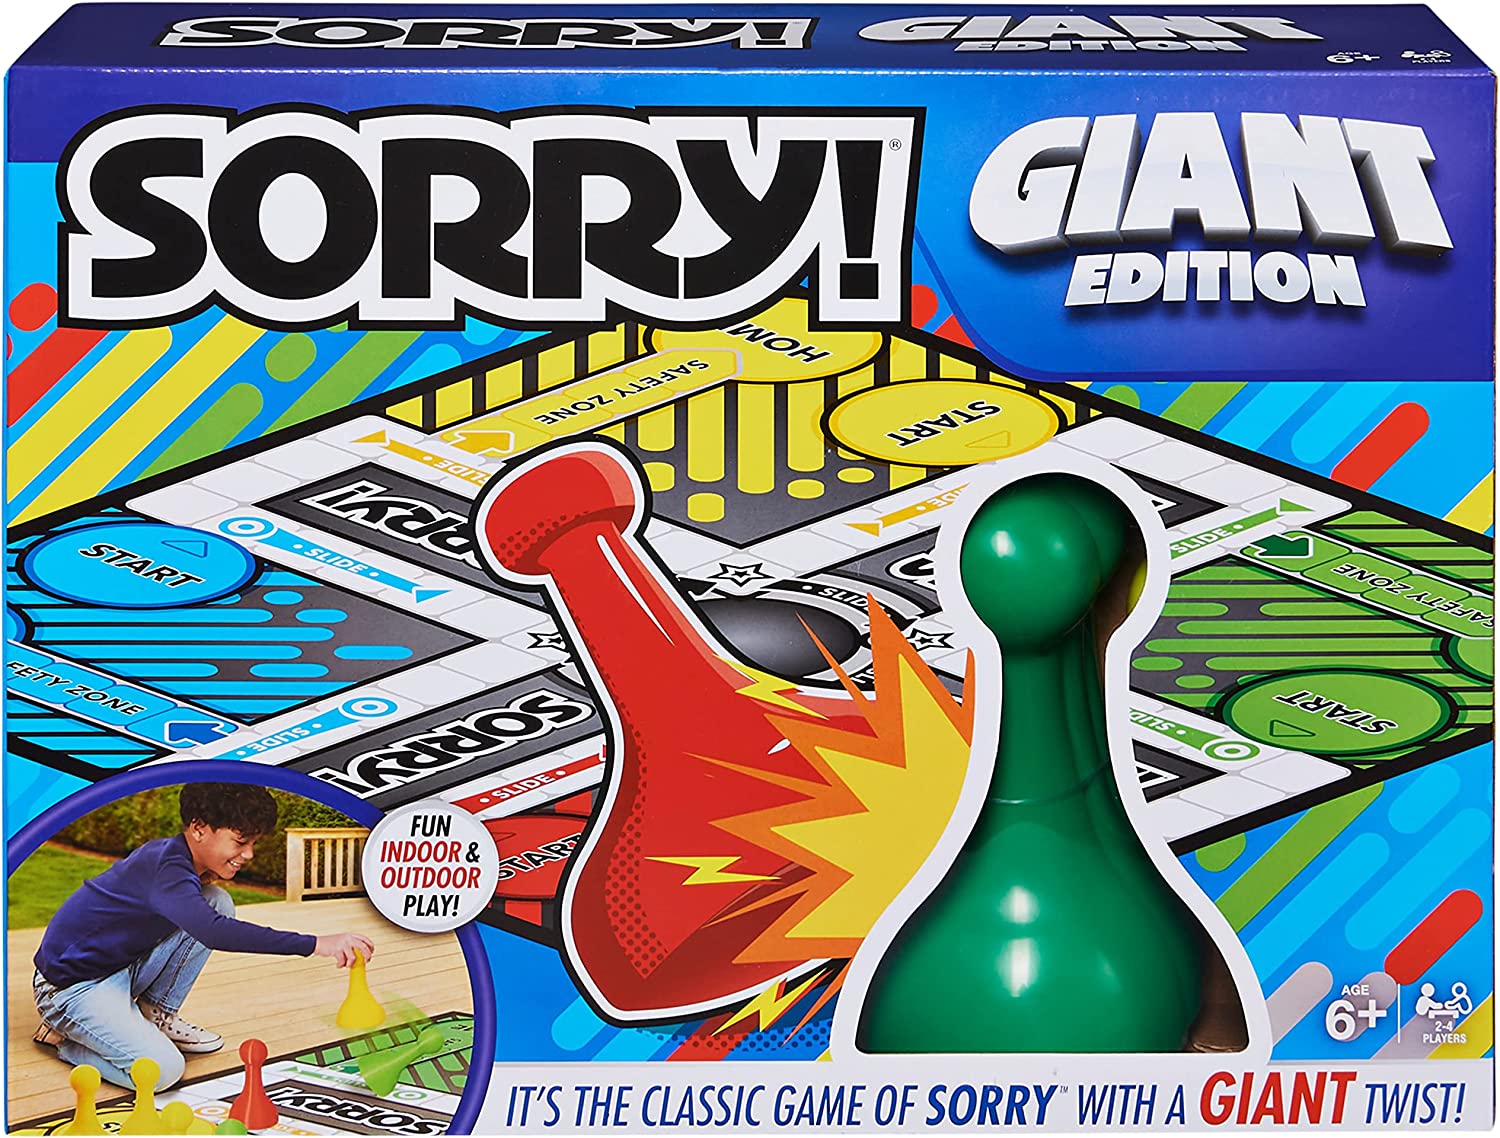 Giant Sorry Game in product box showing colorful game pieces.